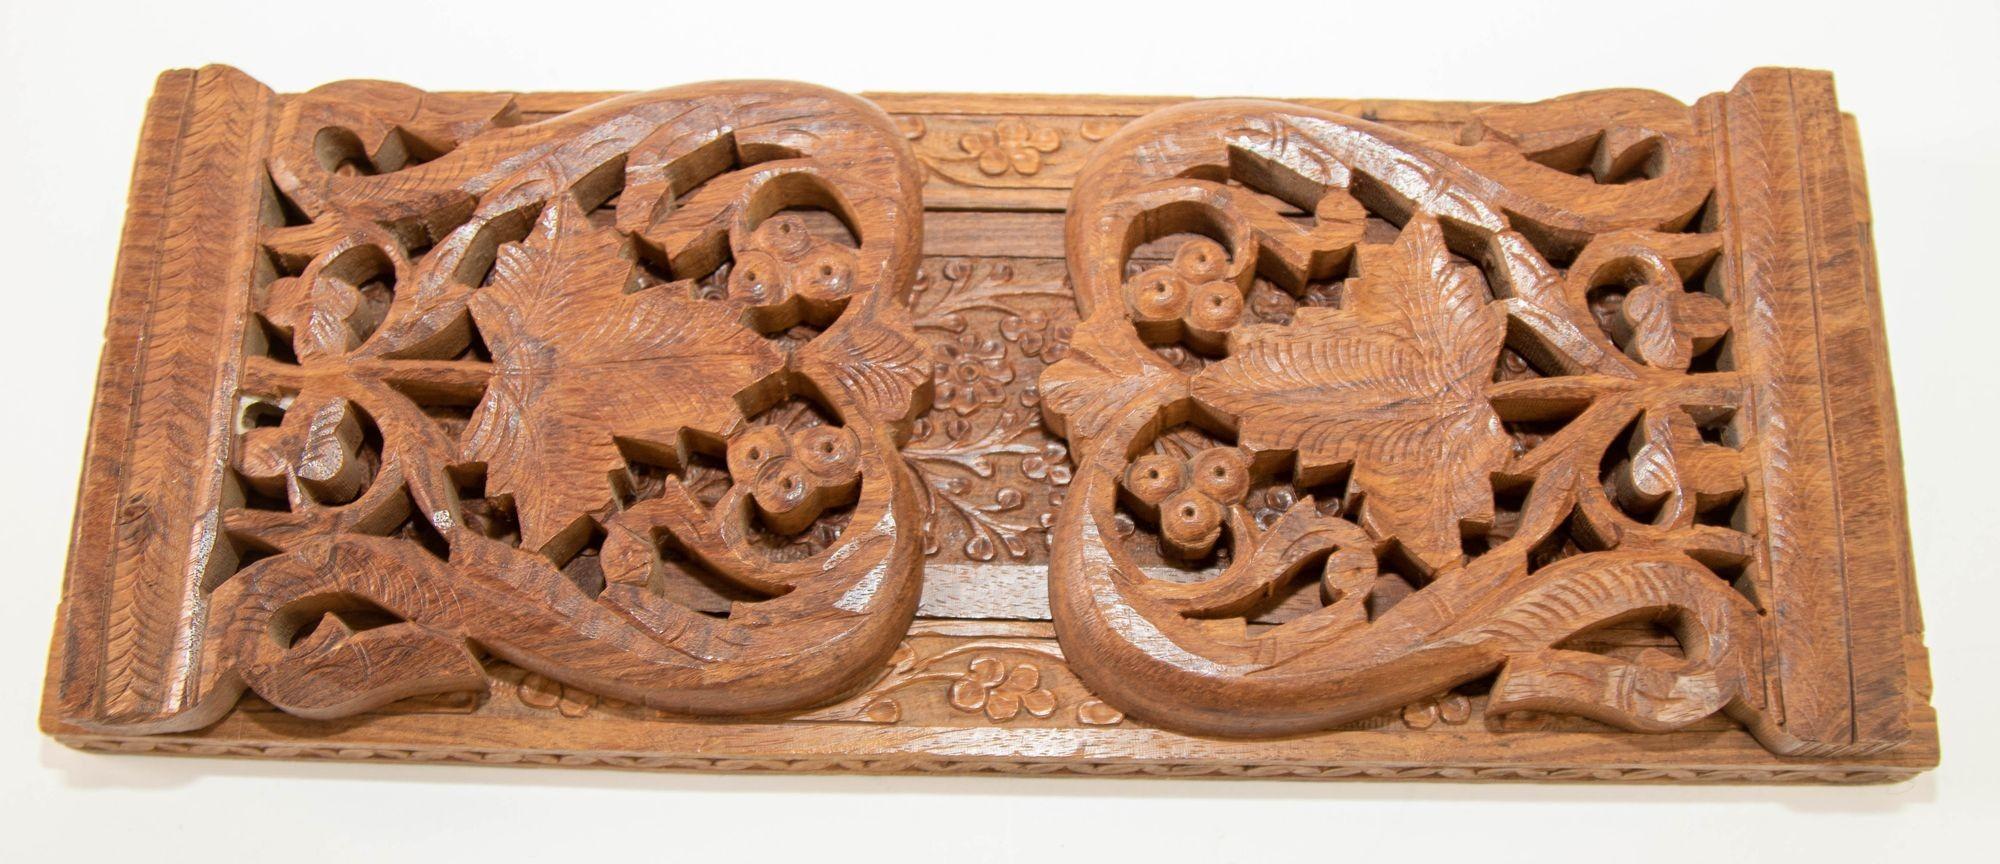 Hand-Carved Expandable Hand carved Teak Wood Book Shelf Bookends from India 1950s For Sale